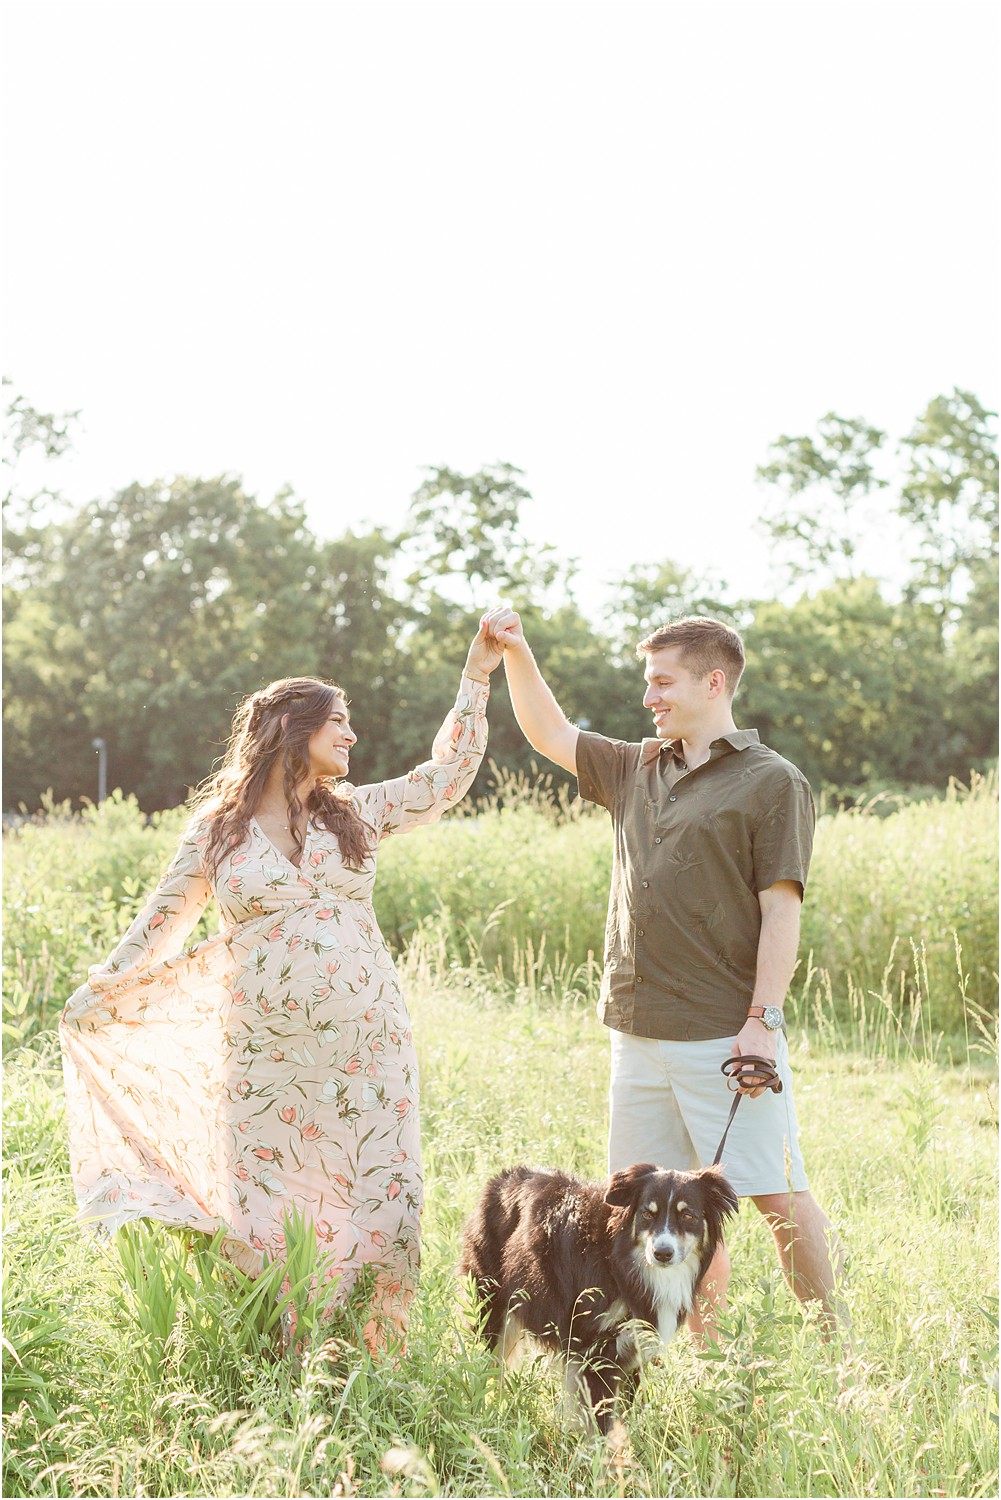 husband and wife twirl in grass with their dog during outdoor maternity session